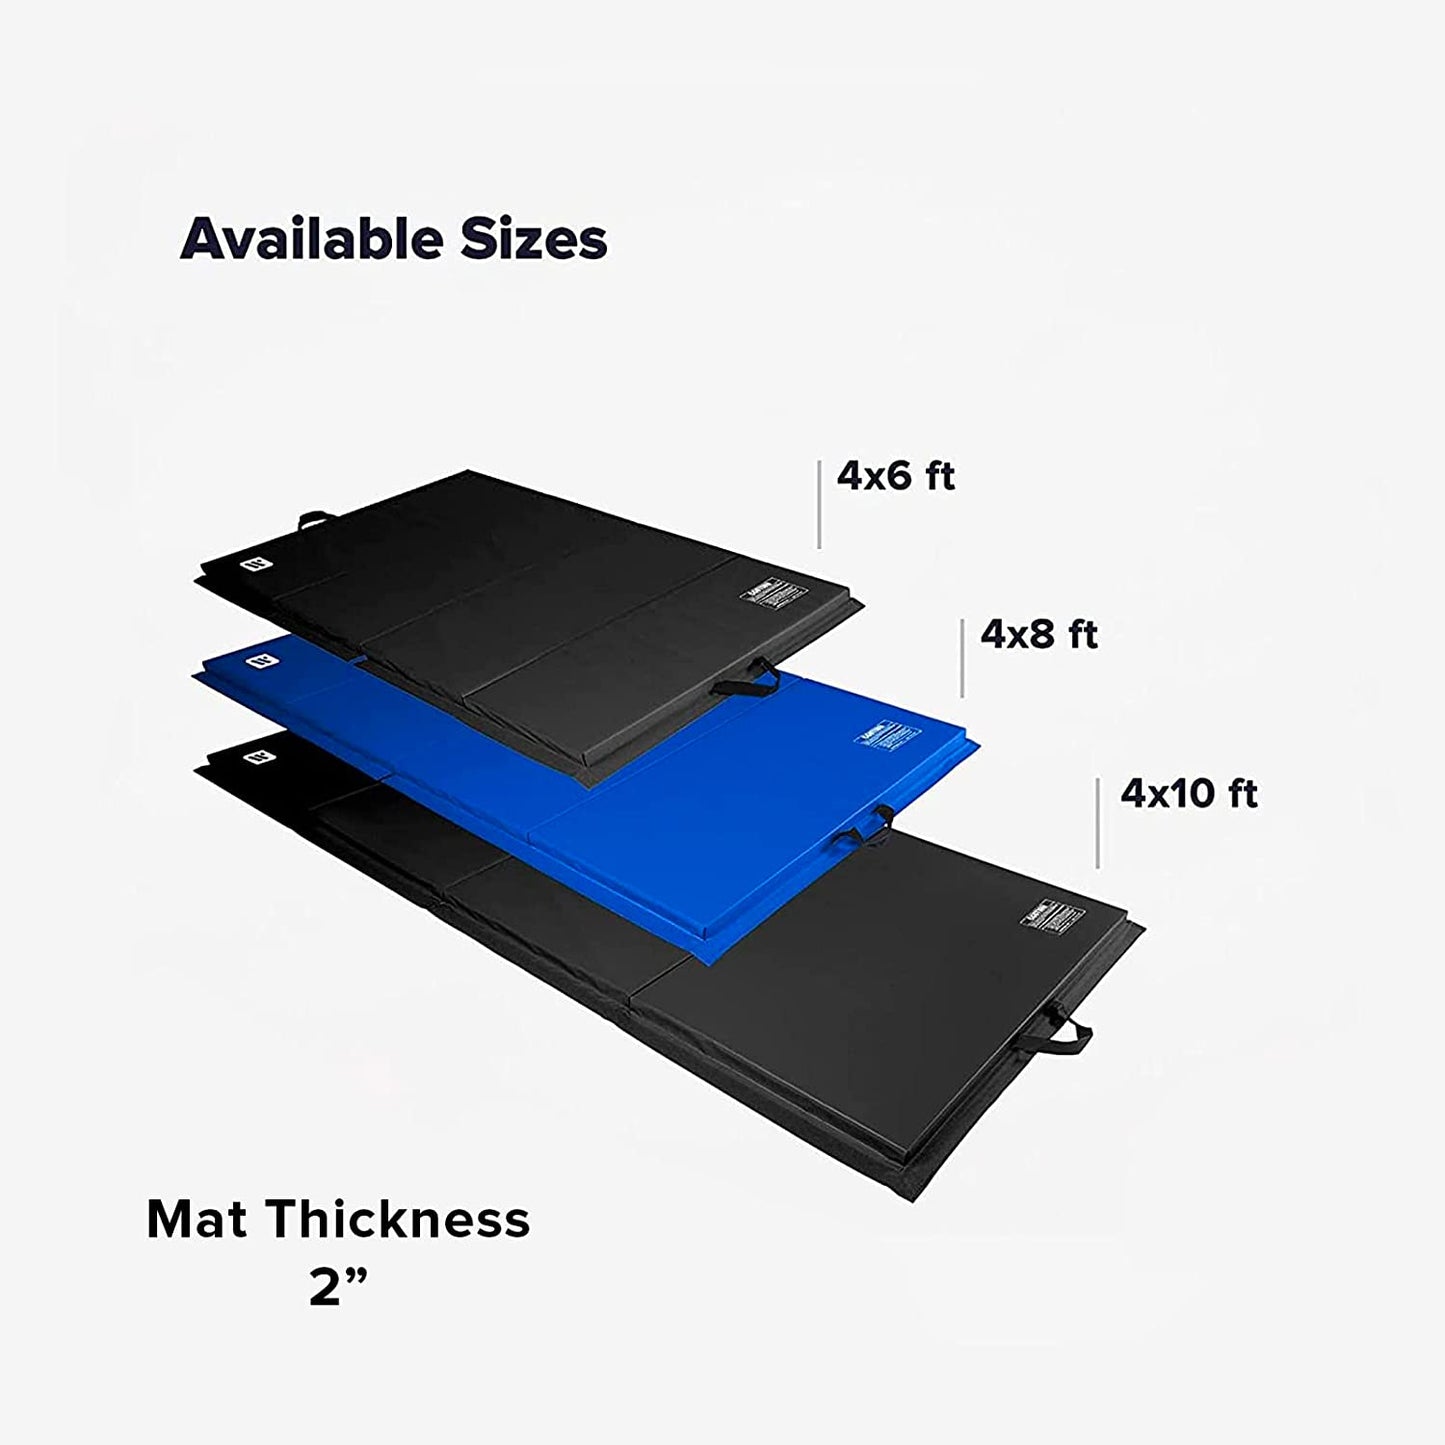 4 ft x 10 ft x 2 in Personal Fitness & Exercise Mat, Lightweight and Folds for Carrying